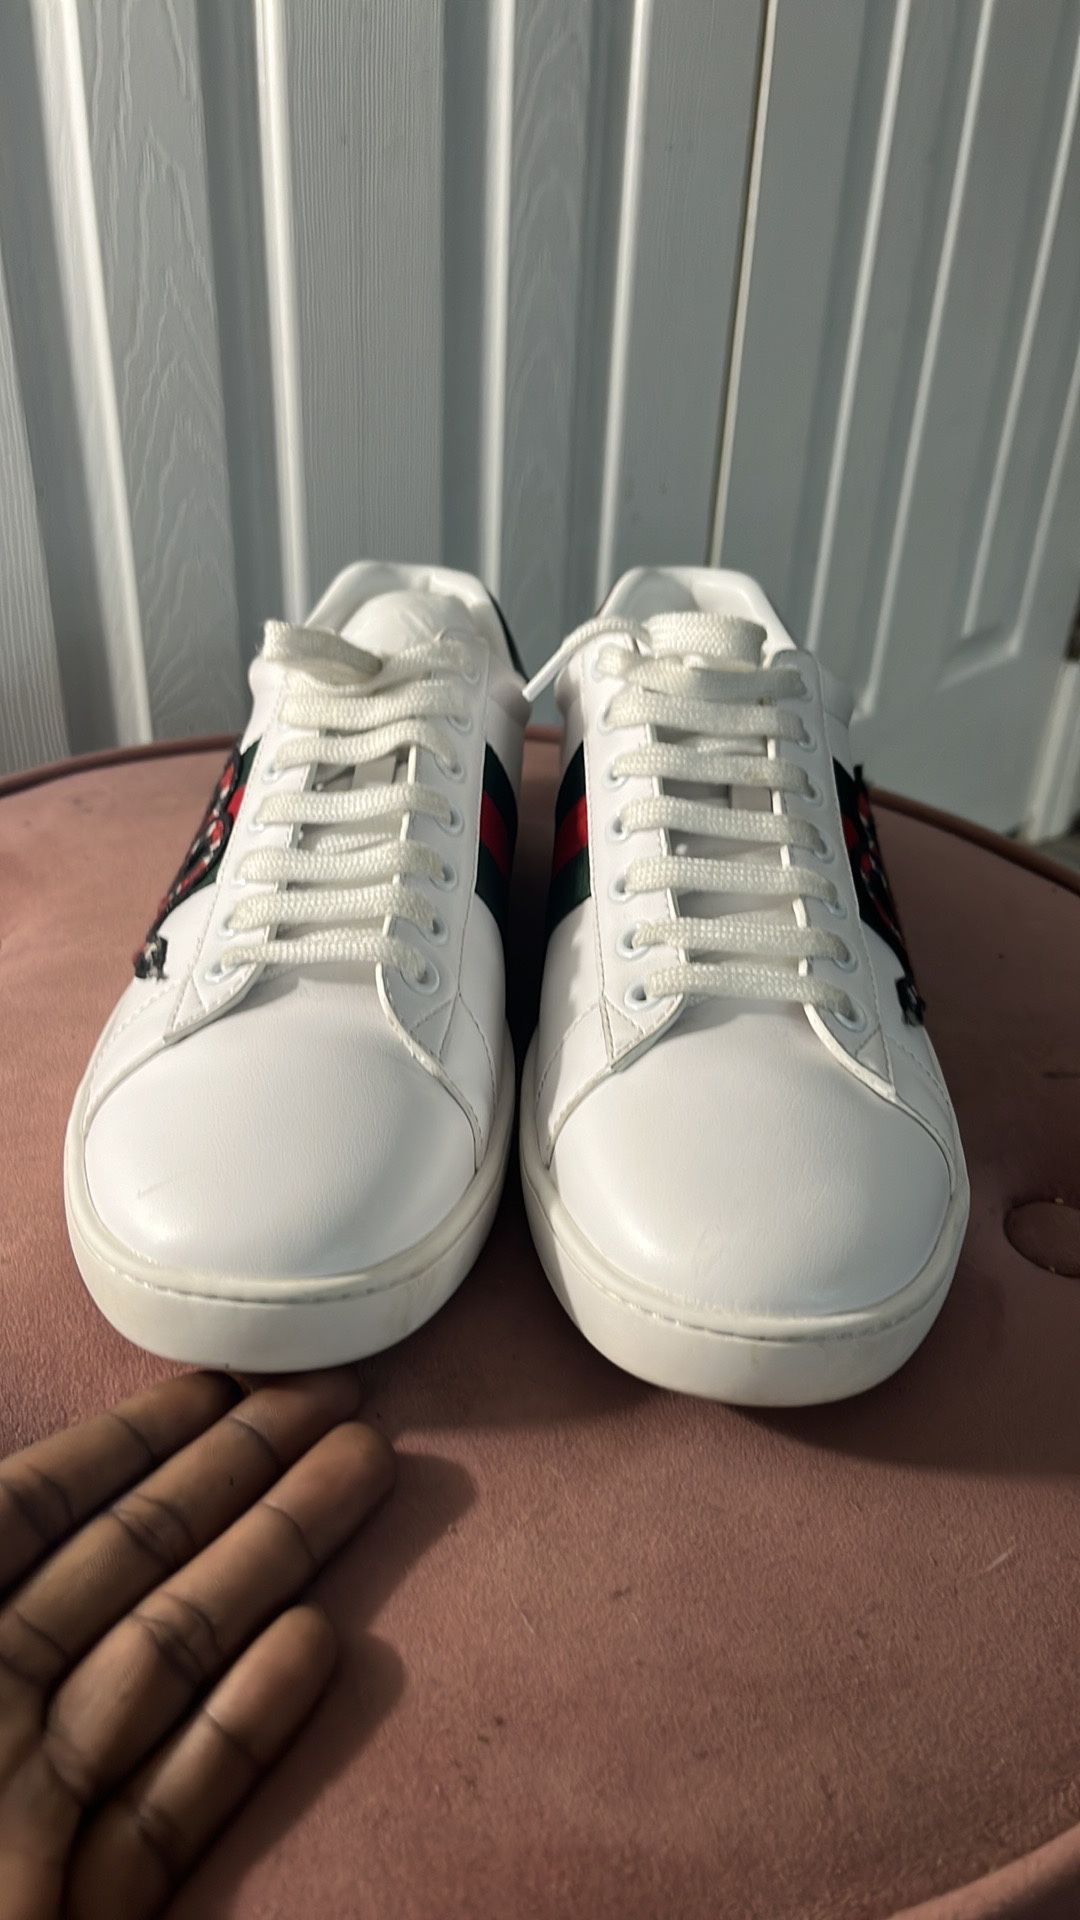 Gucci Ace Embroidered 'Snake